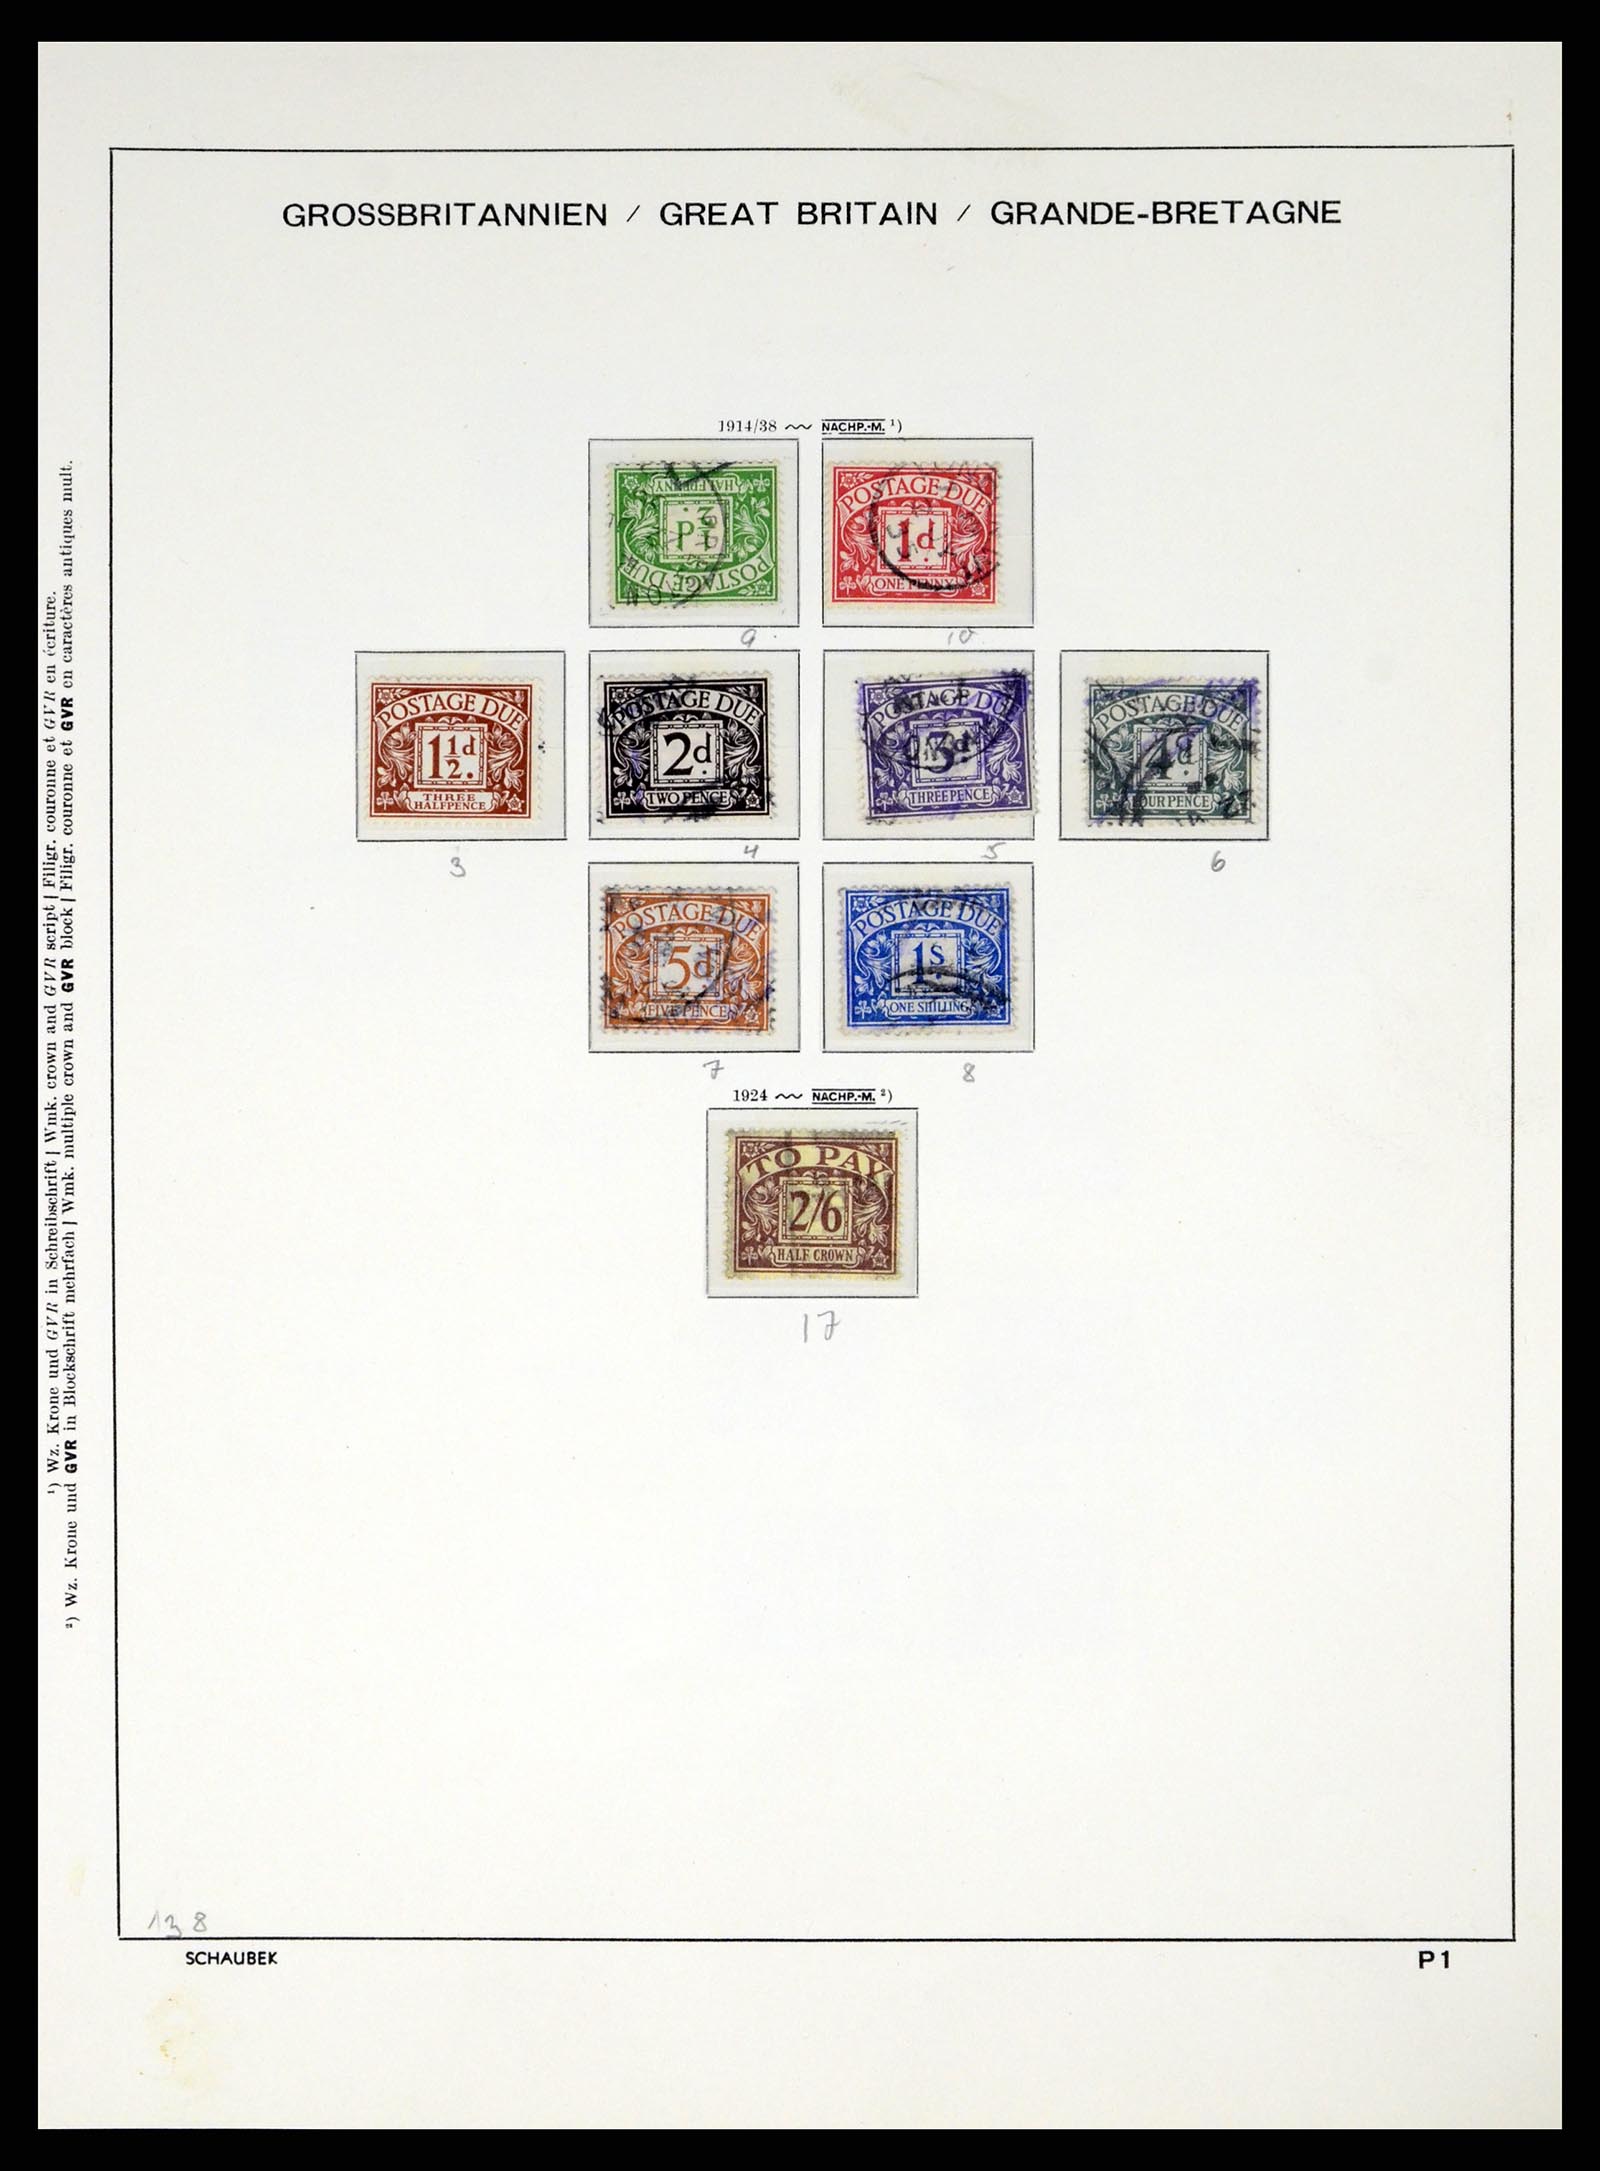 37310 120 - Stamp collection 37310 Great Britain 1840-1988.